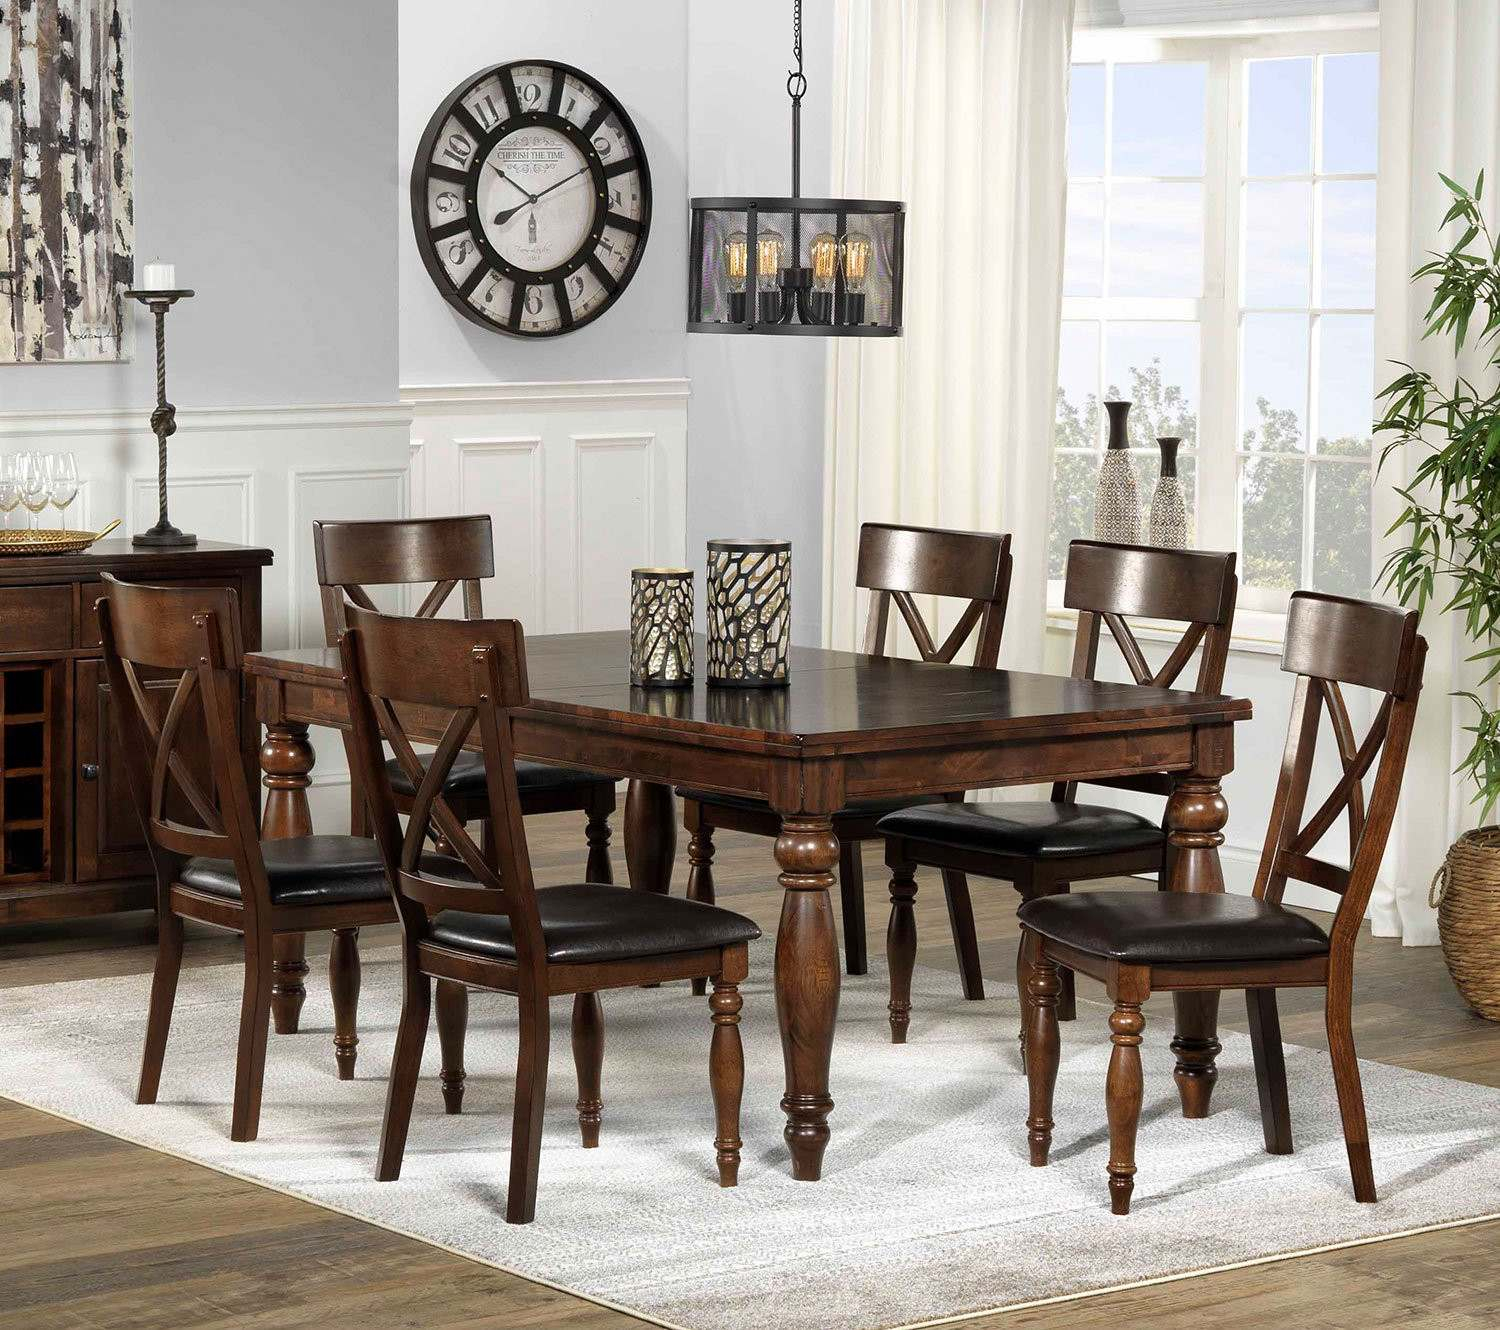 Dining Room Chairs Leons 2019 Home Design within size 1500 X 1330